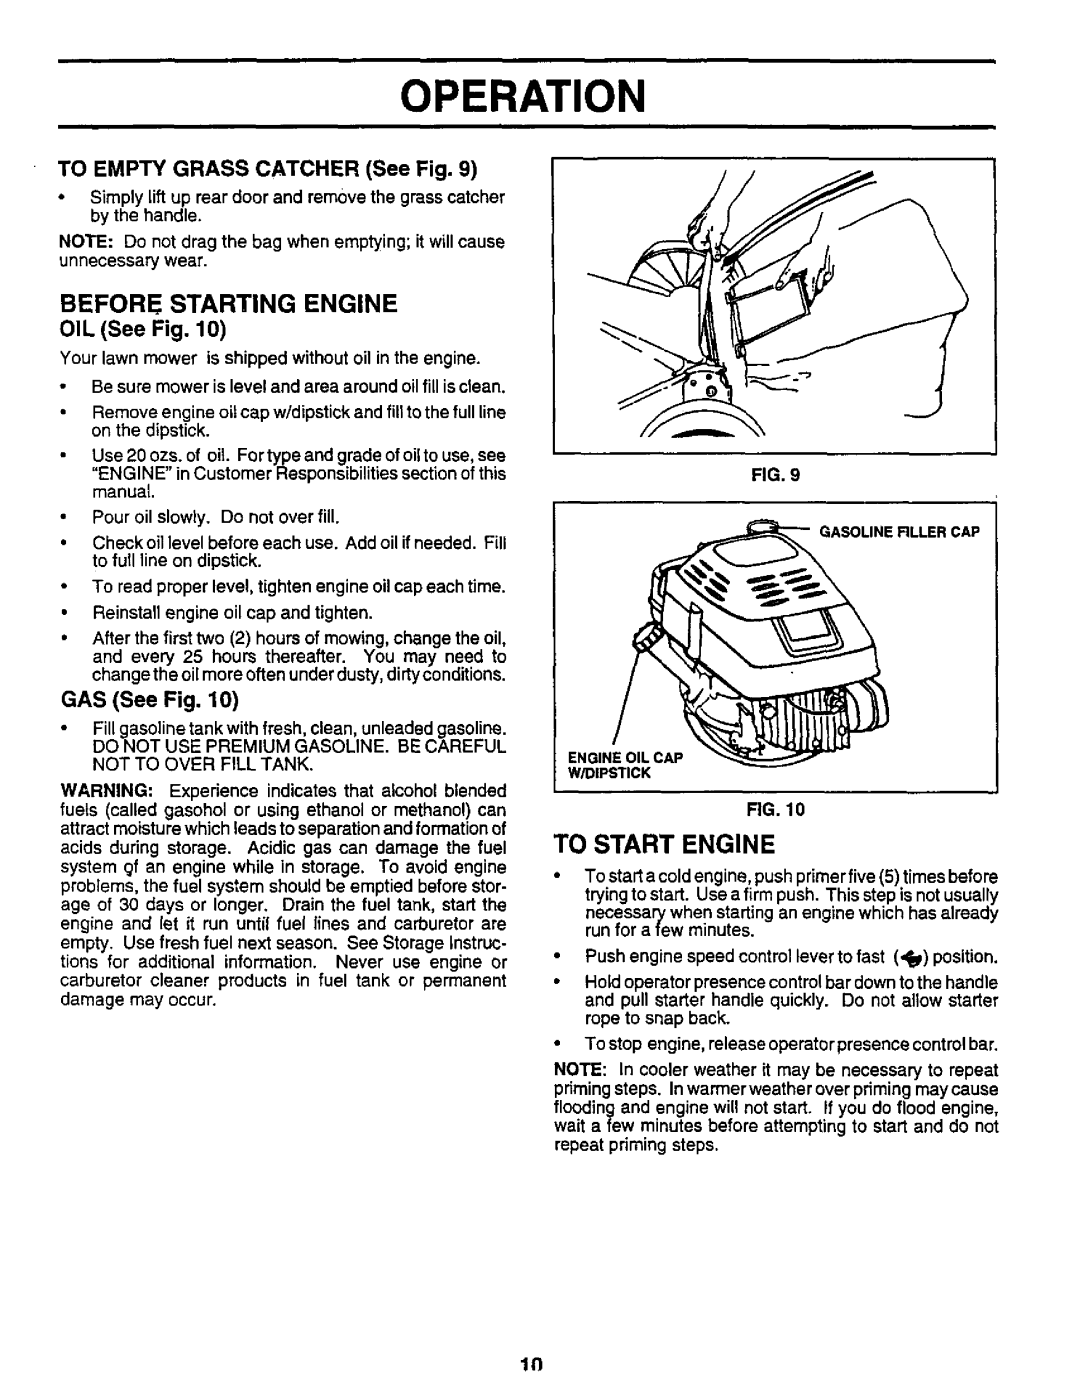 Sears 917.373981 owner manual Operation, Before Starting Engine, TO EMPTY GRASS CATCHER See Fig, OIL See Fig, GAS See Fig 